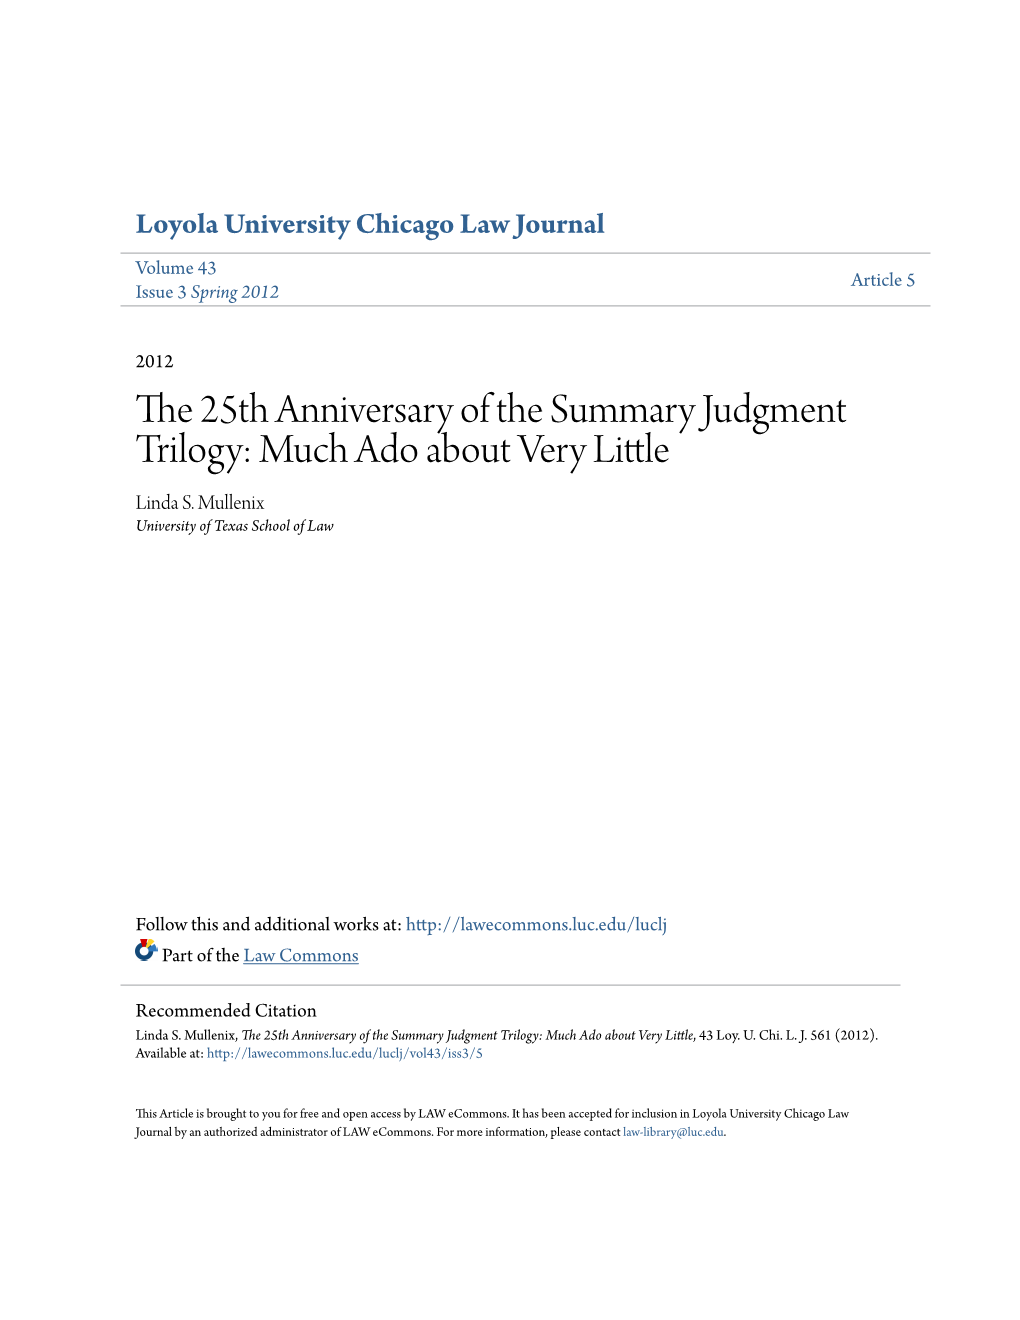 The 25Th Anniversary of the Summary Judgment Trilogy: Much Ado About Very Little Linda S